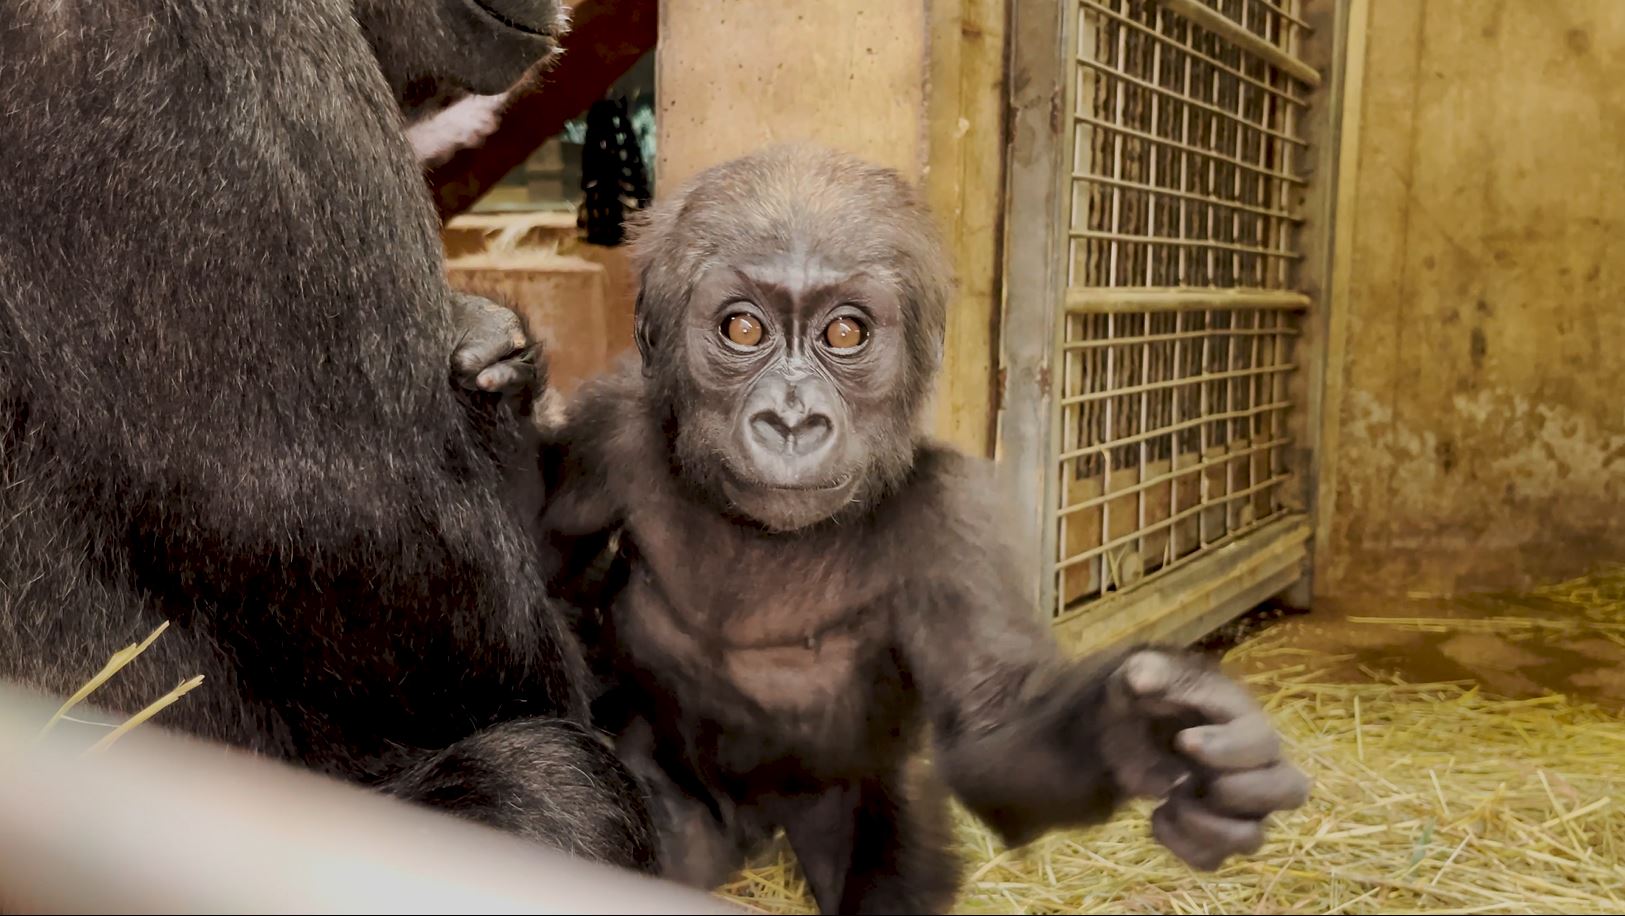 Baby gorilla stares into the camera while her mother holds her.